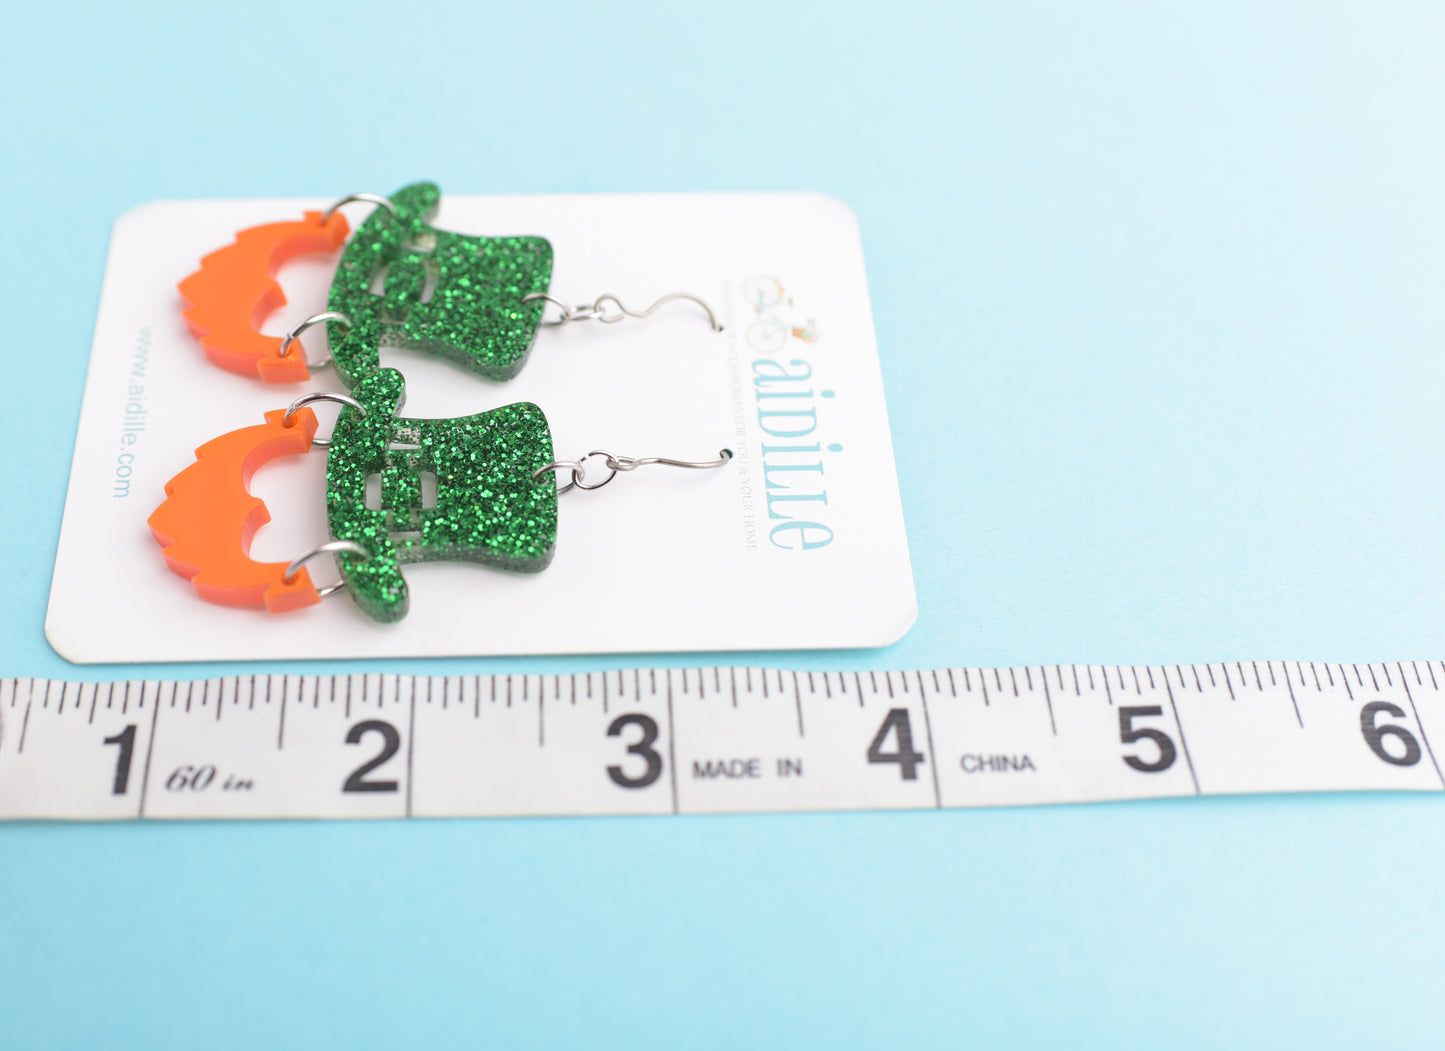 Leprechaun Hat and Beard Dangle Earrings with Titanium Ear Wires